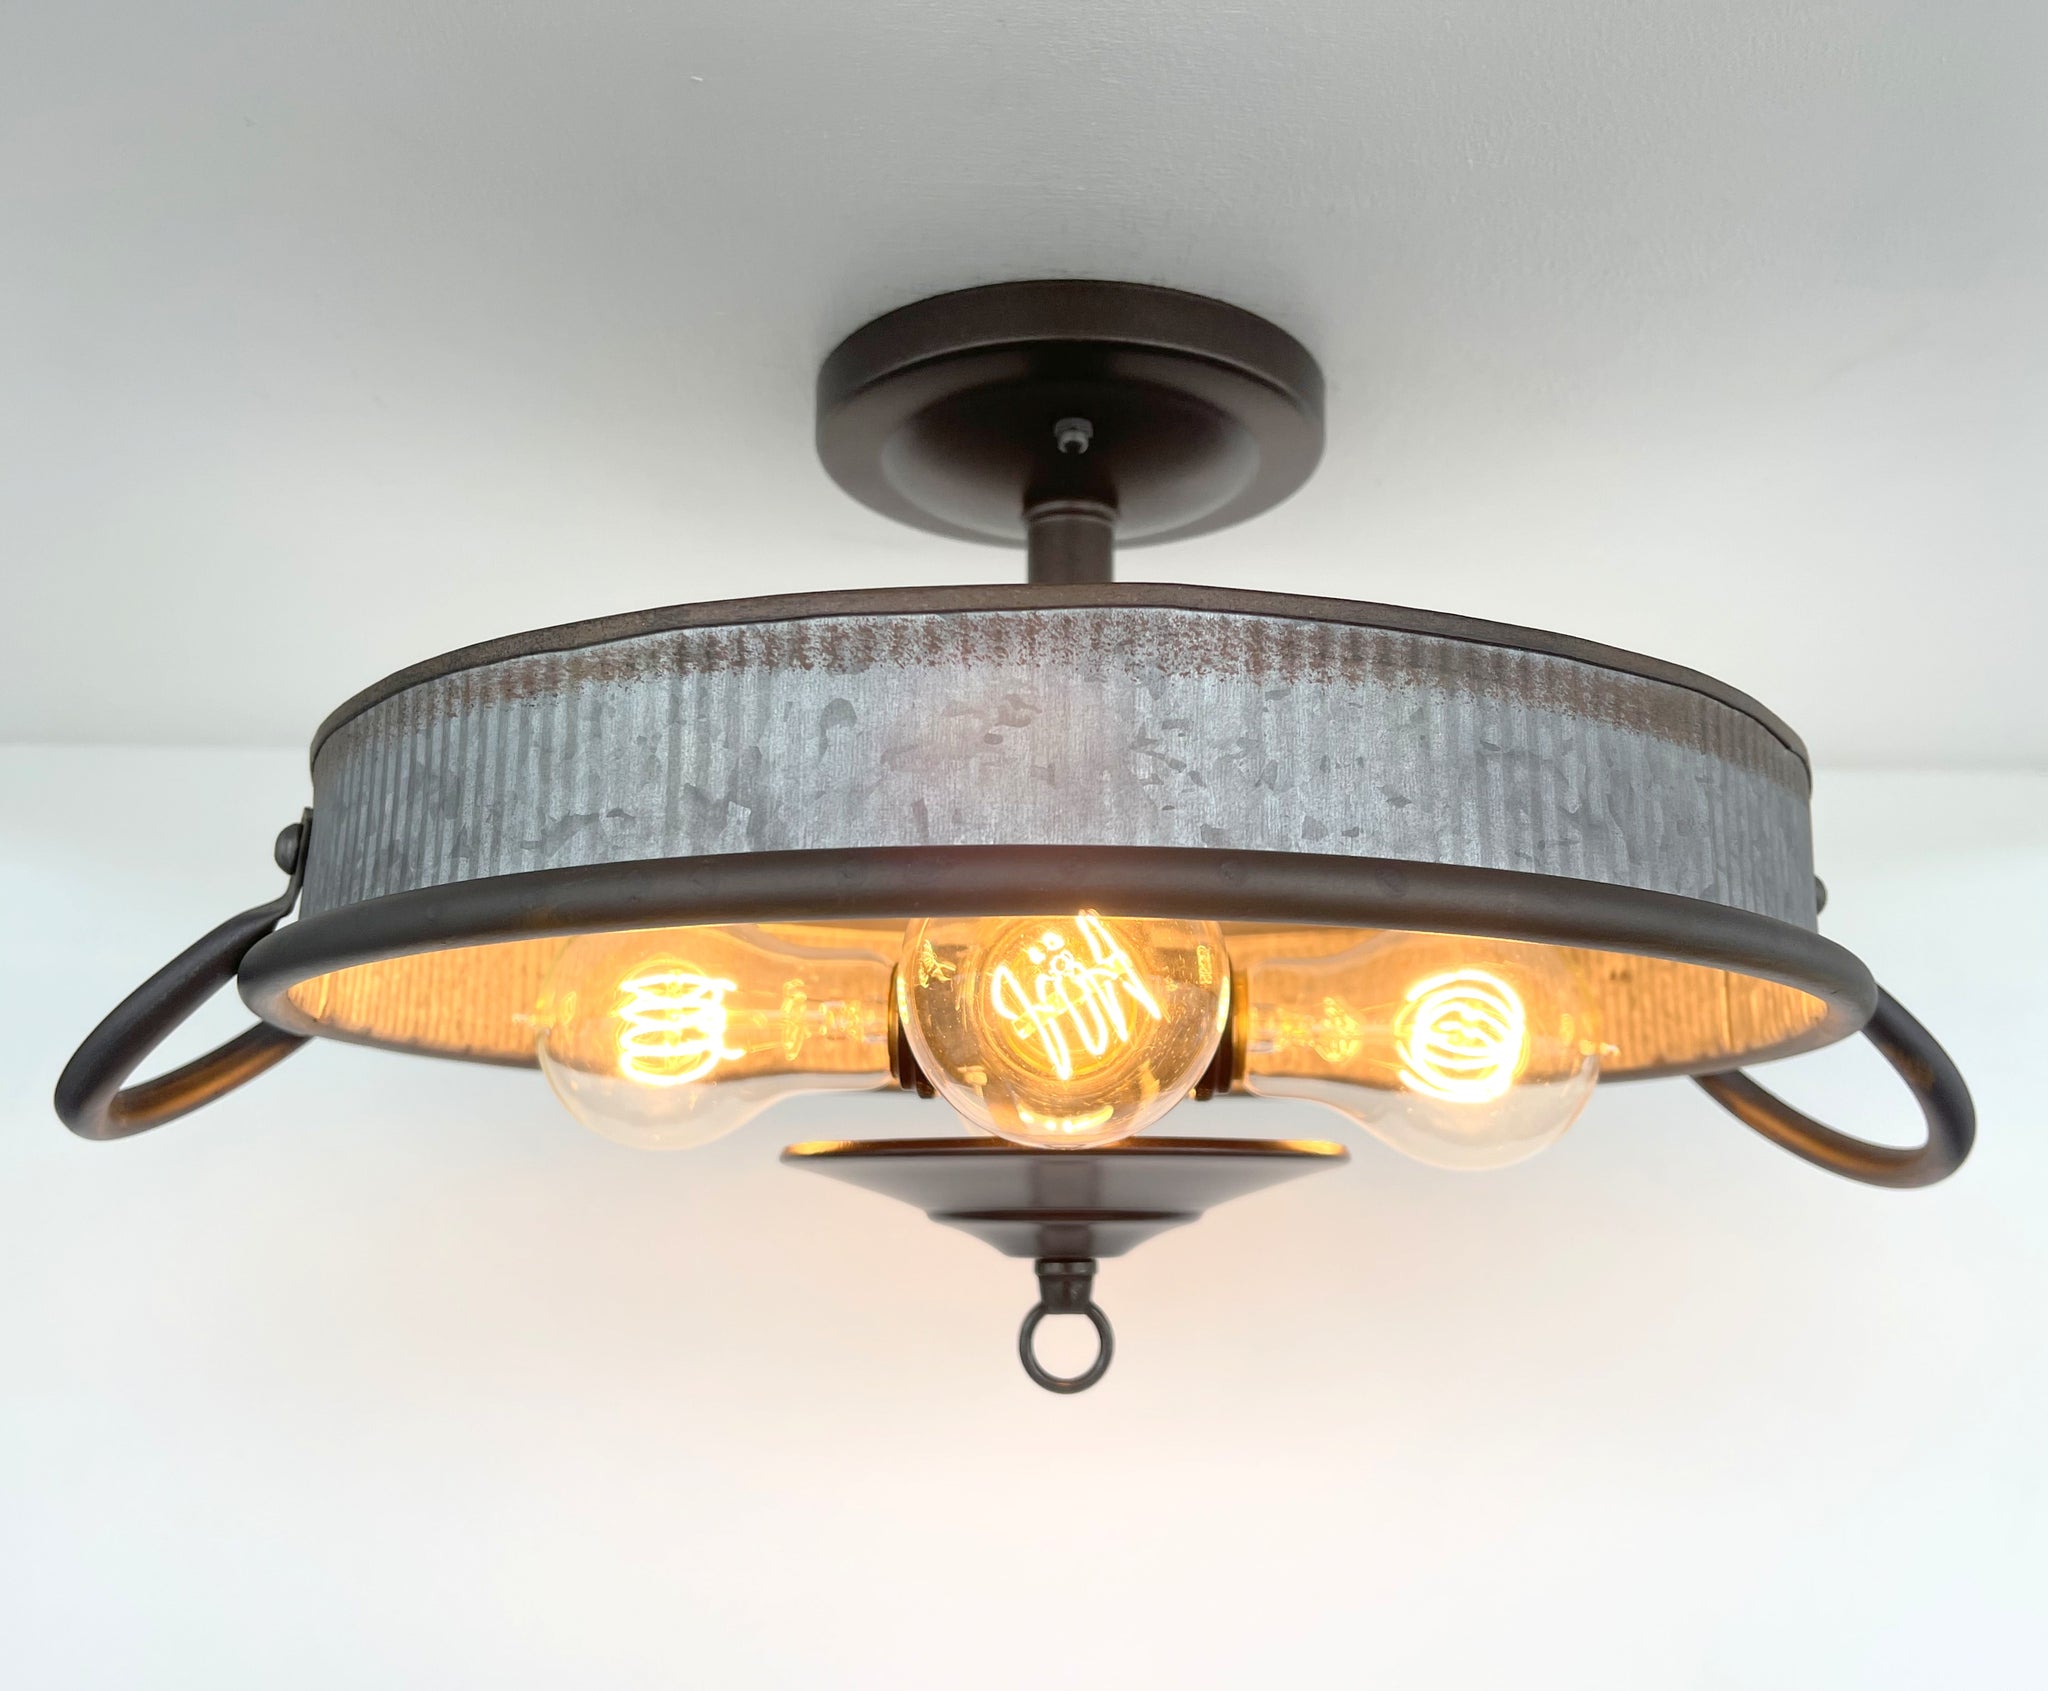 Rustic Ceiling Light Galvanized for an Industrial Light Fixture - The Lamp  Goods